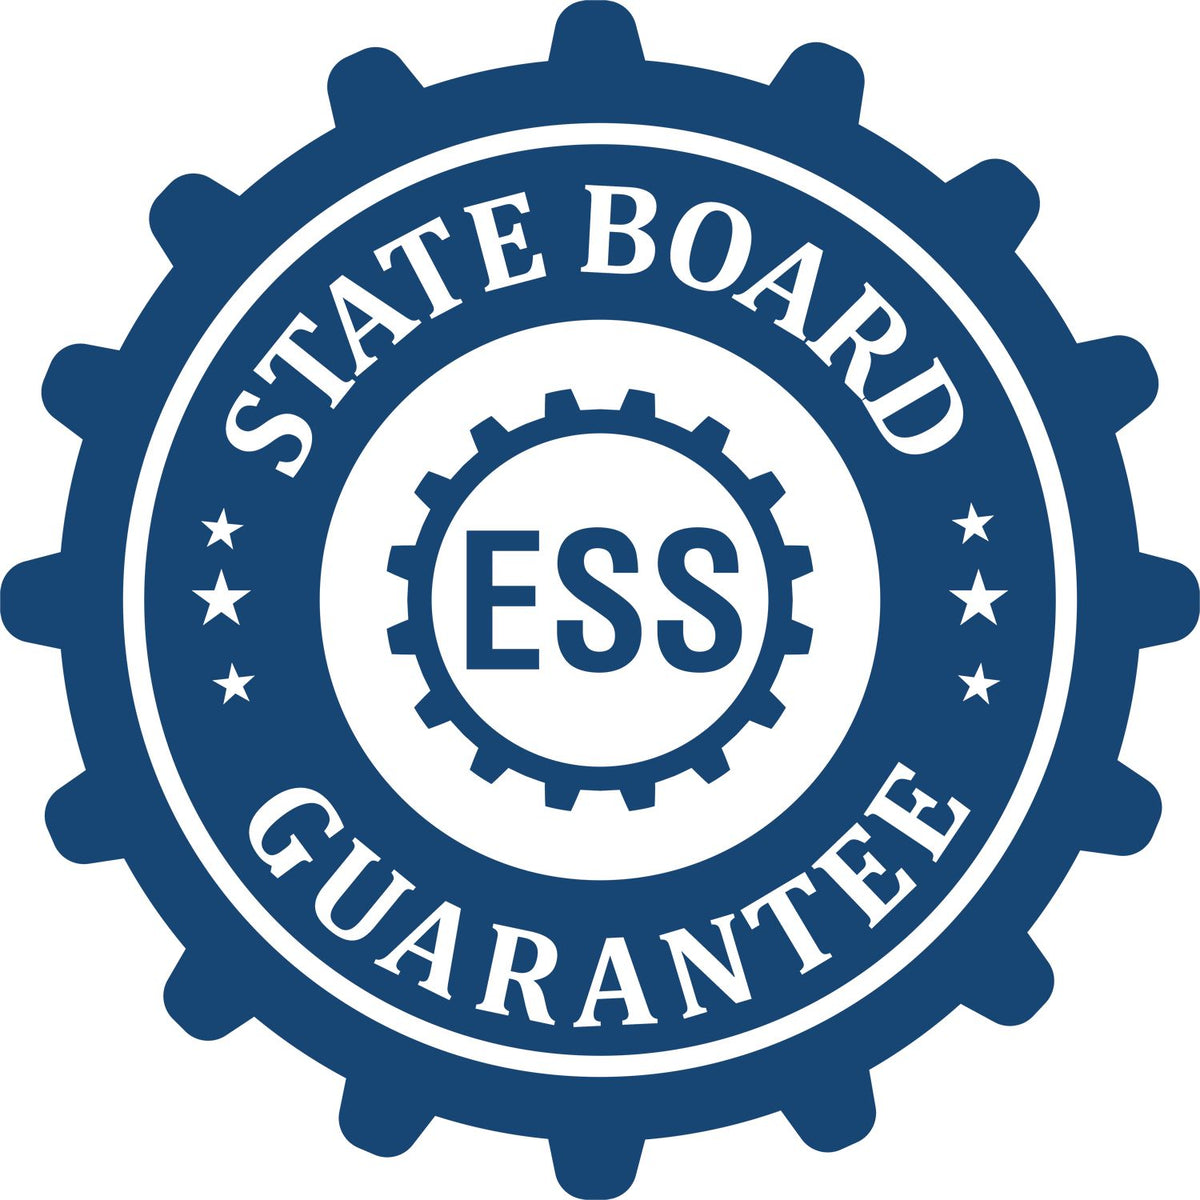 An emblem in a gear shape illustrating a state board guarantee for the State of Guam Long Reach Architectural Embossing Seal product.